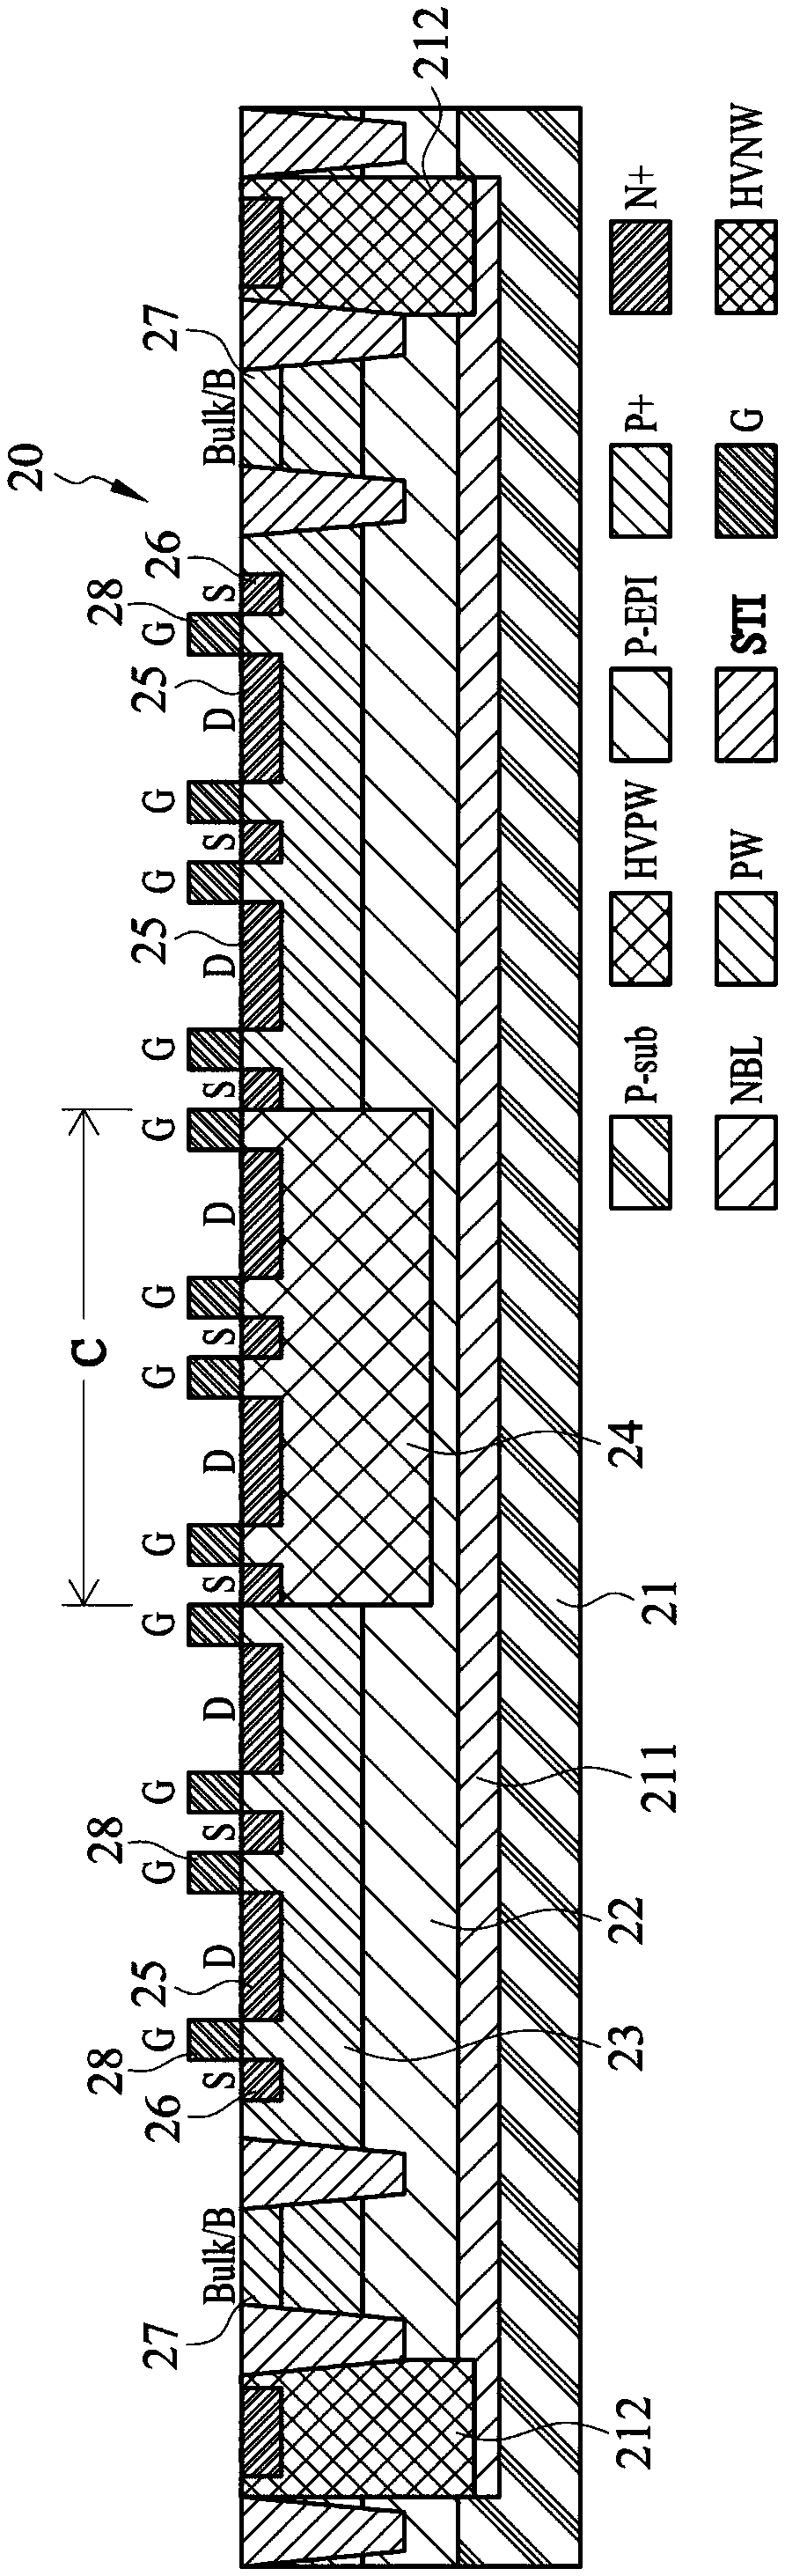 Electrostatic protection element layout structure with high electrostatic discharge tolerance